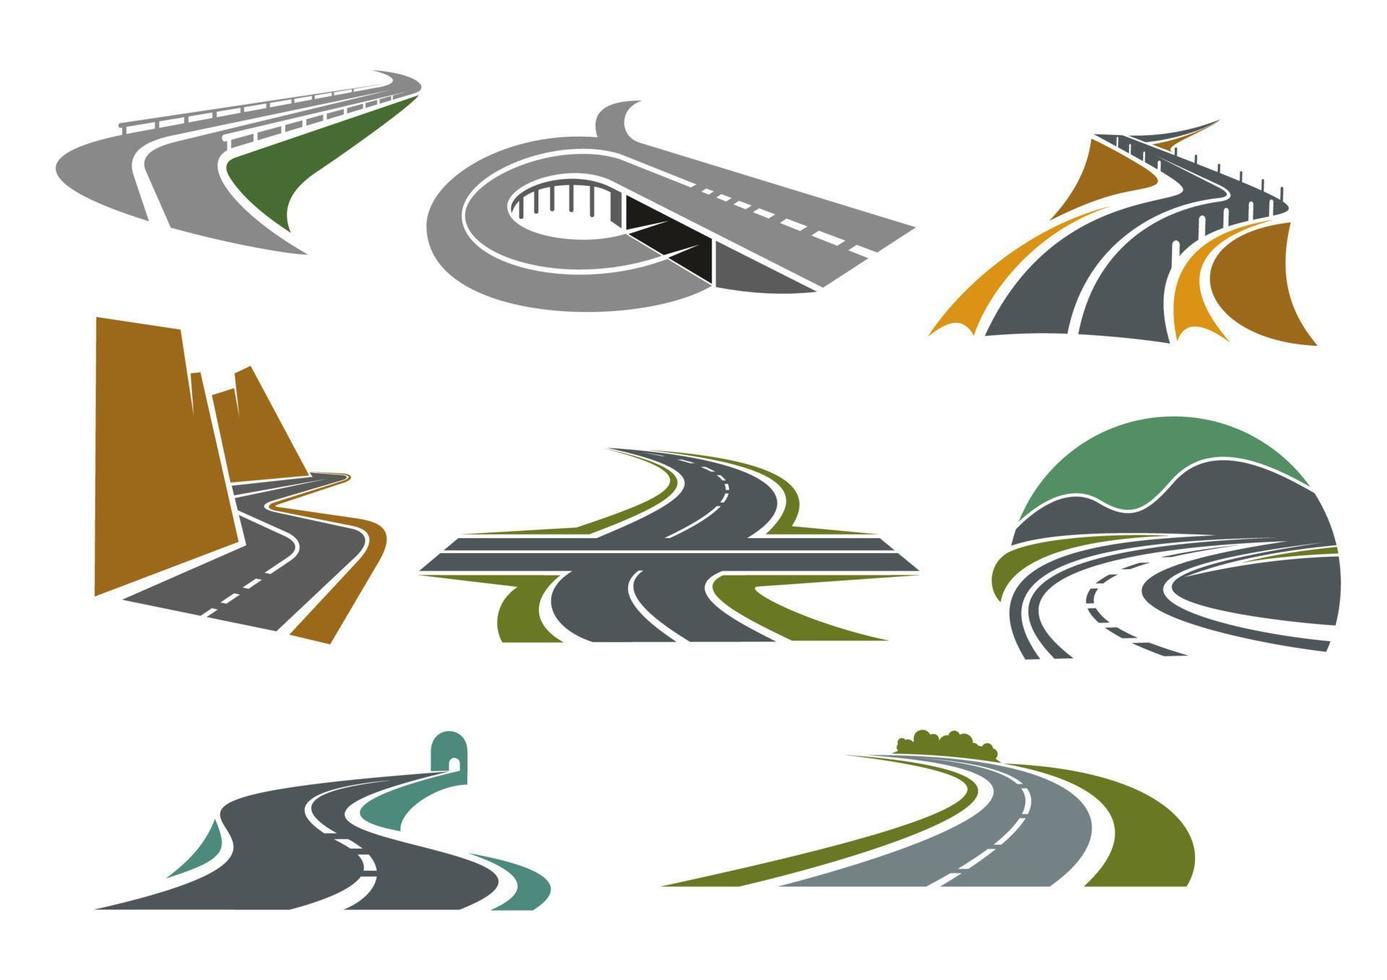 Highway and road icons for transportation design vector